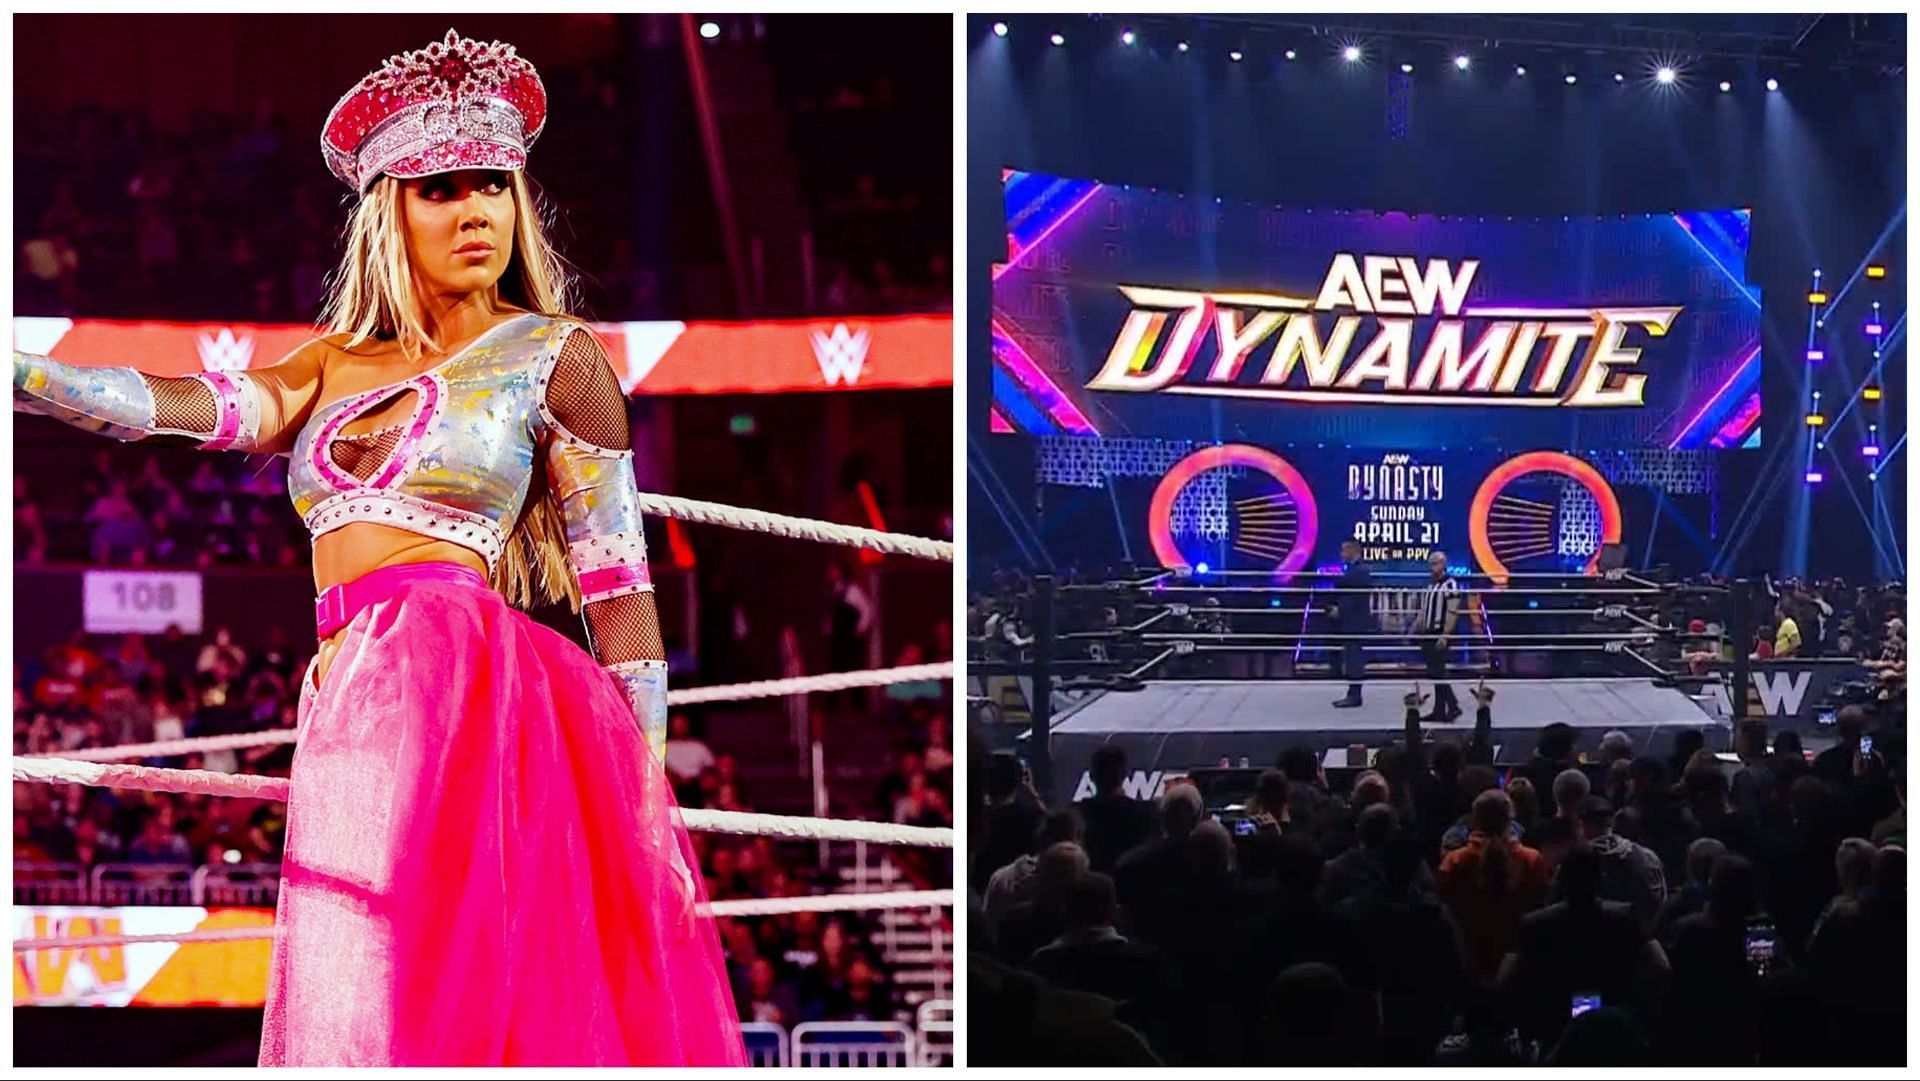 Chelsea Green on WWE RAW, AEW fans pack their local arena for Dynamite